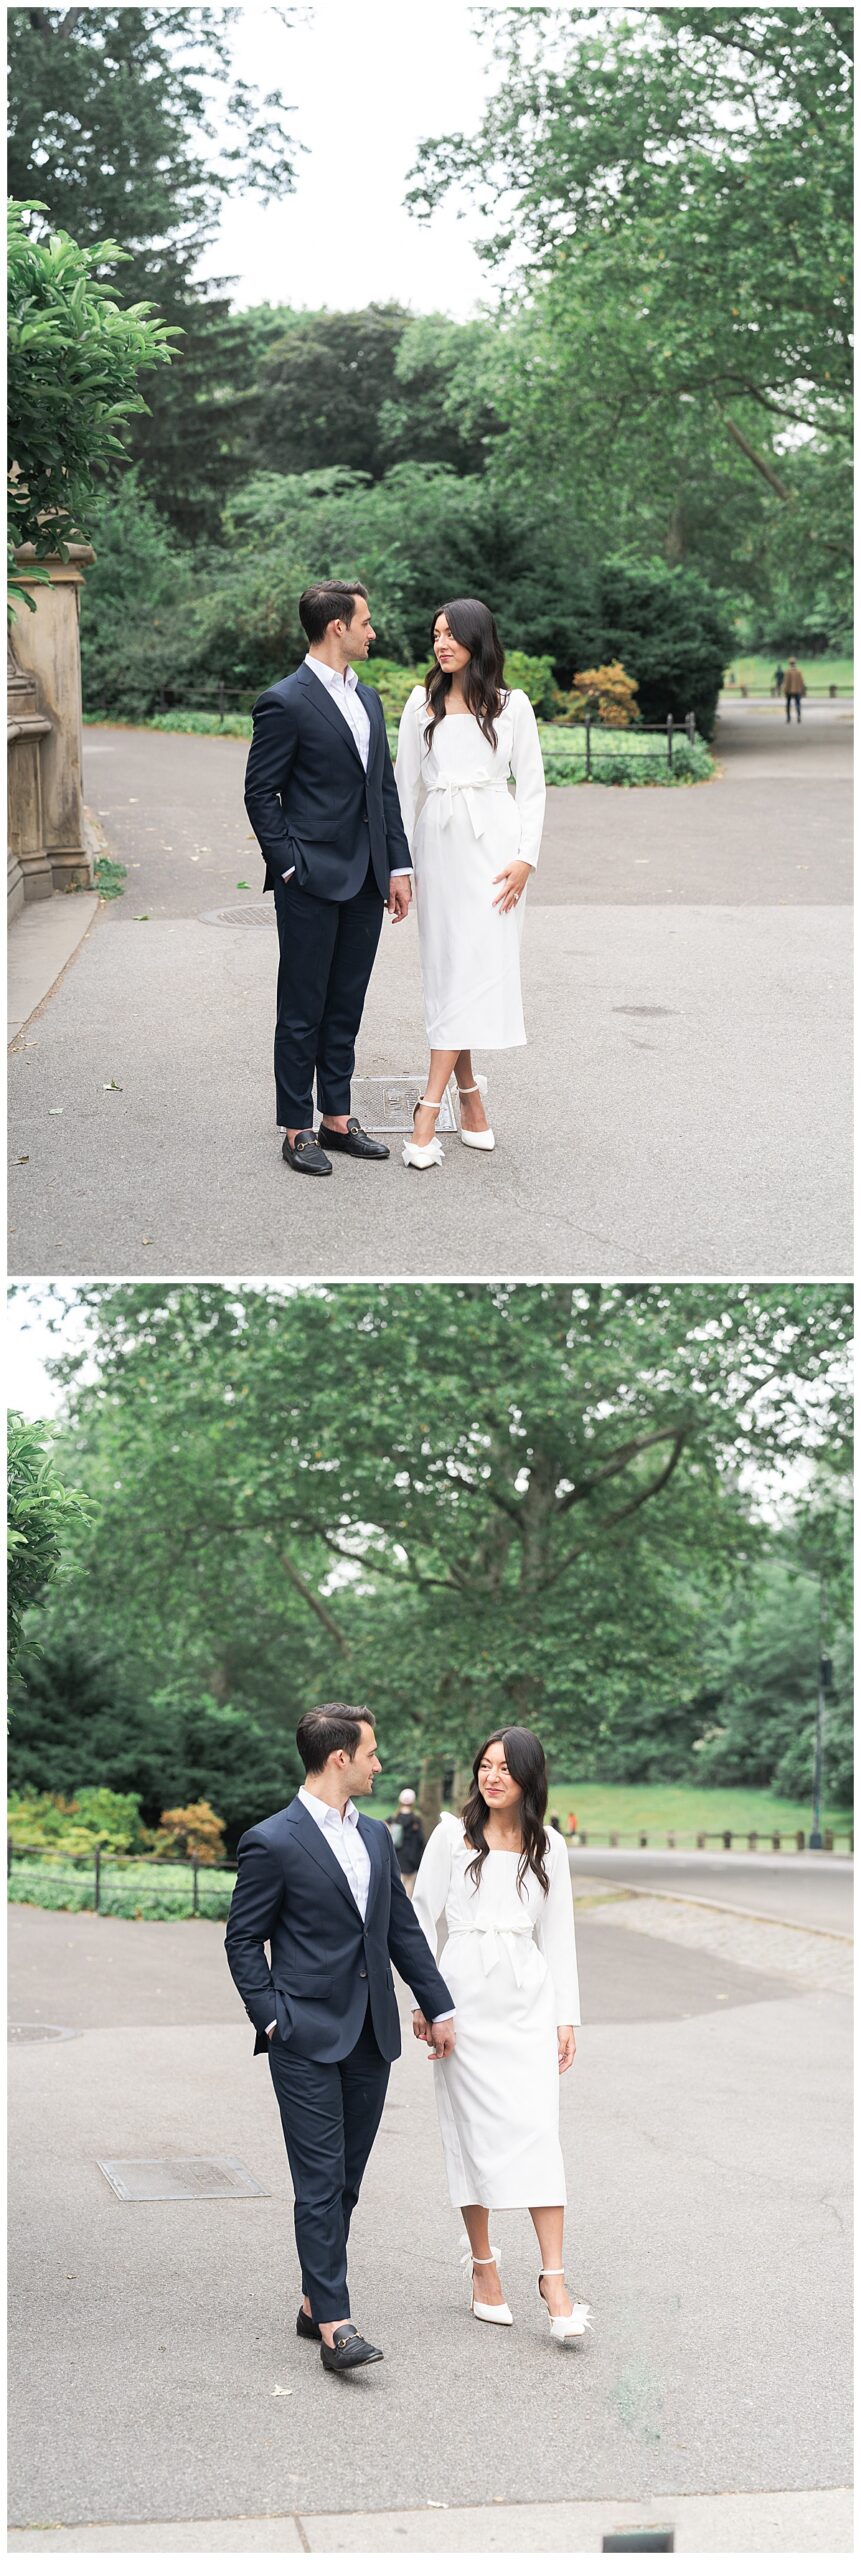 Couple walk hand in hand together during their Destination Engagement Session